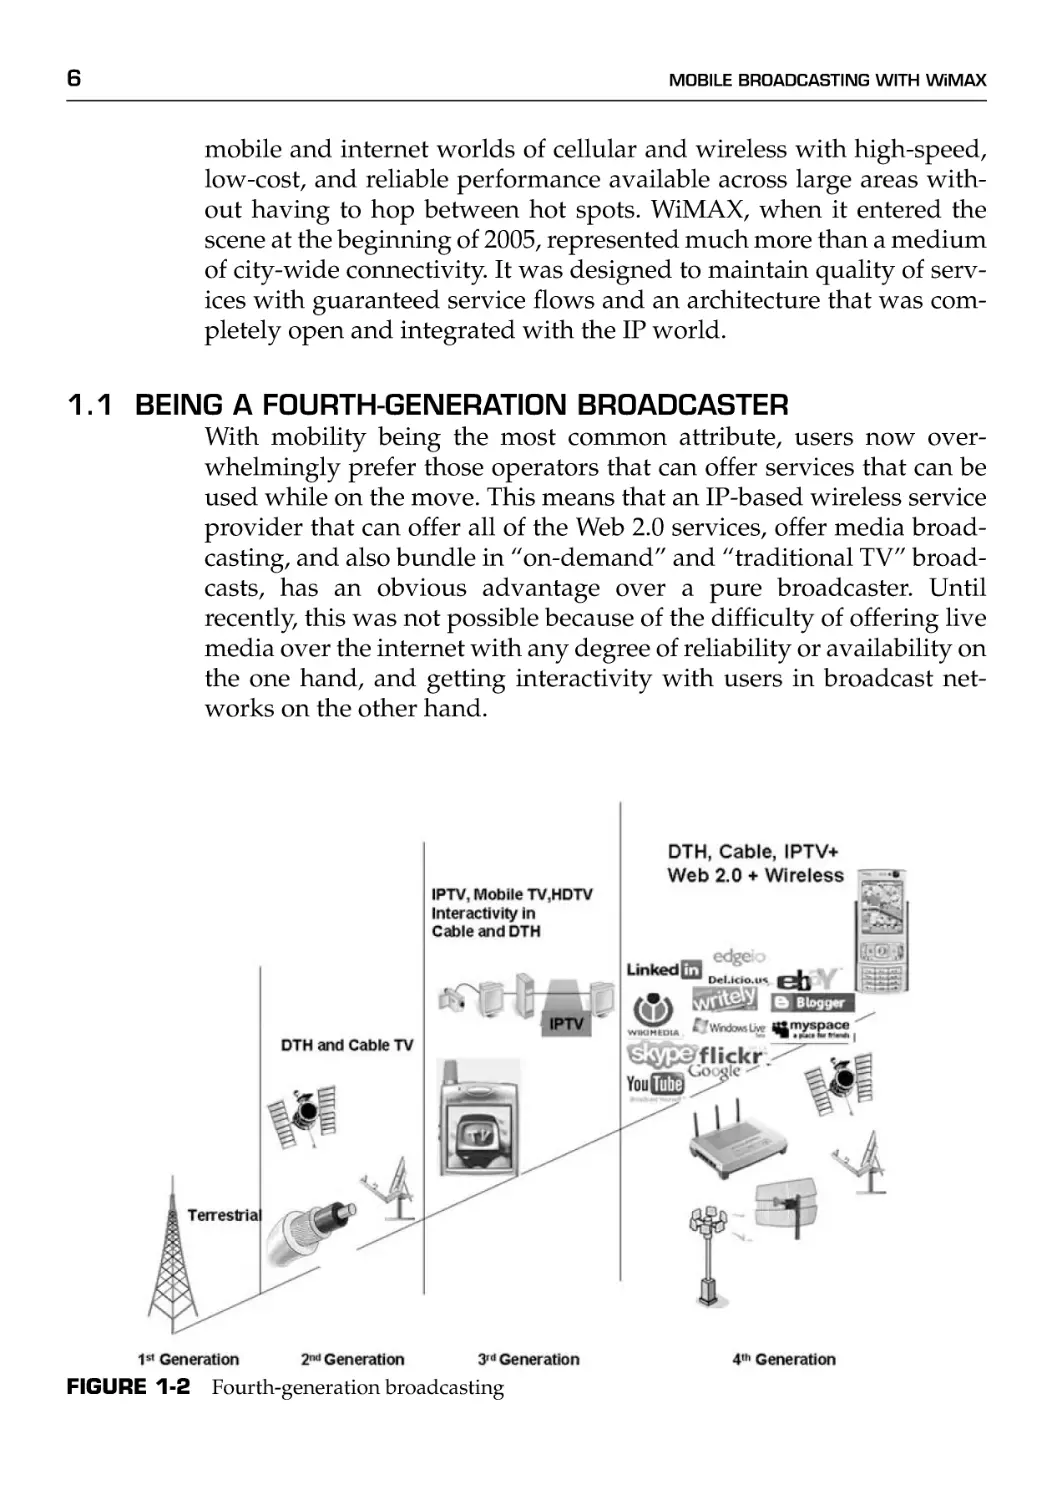 1.1 Being a Fourth-Generation Broadcaster